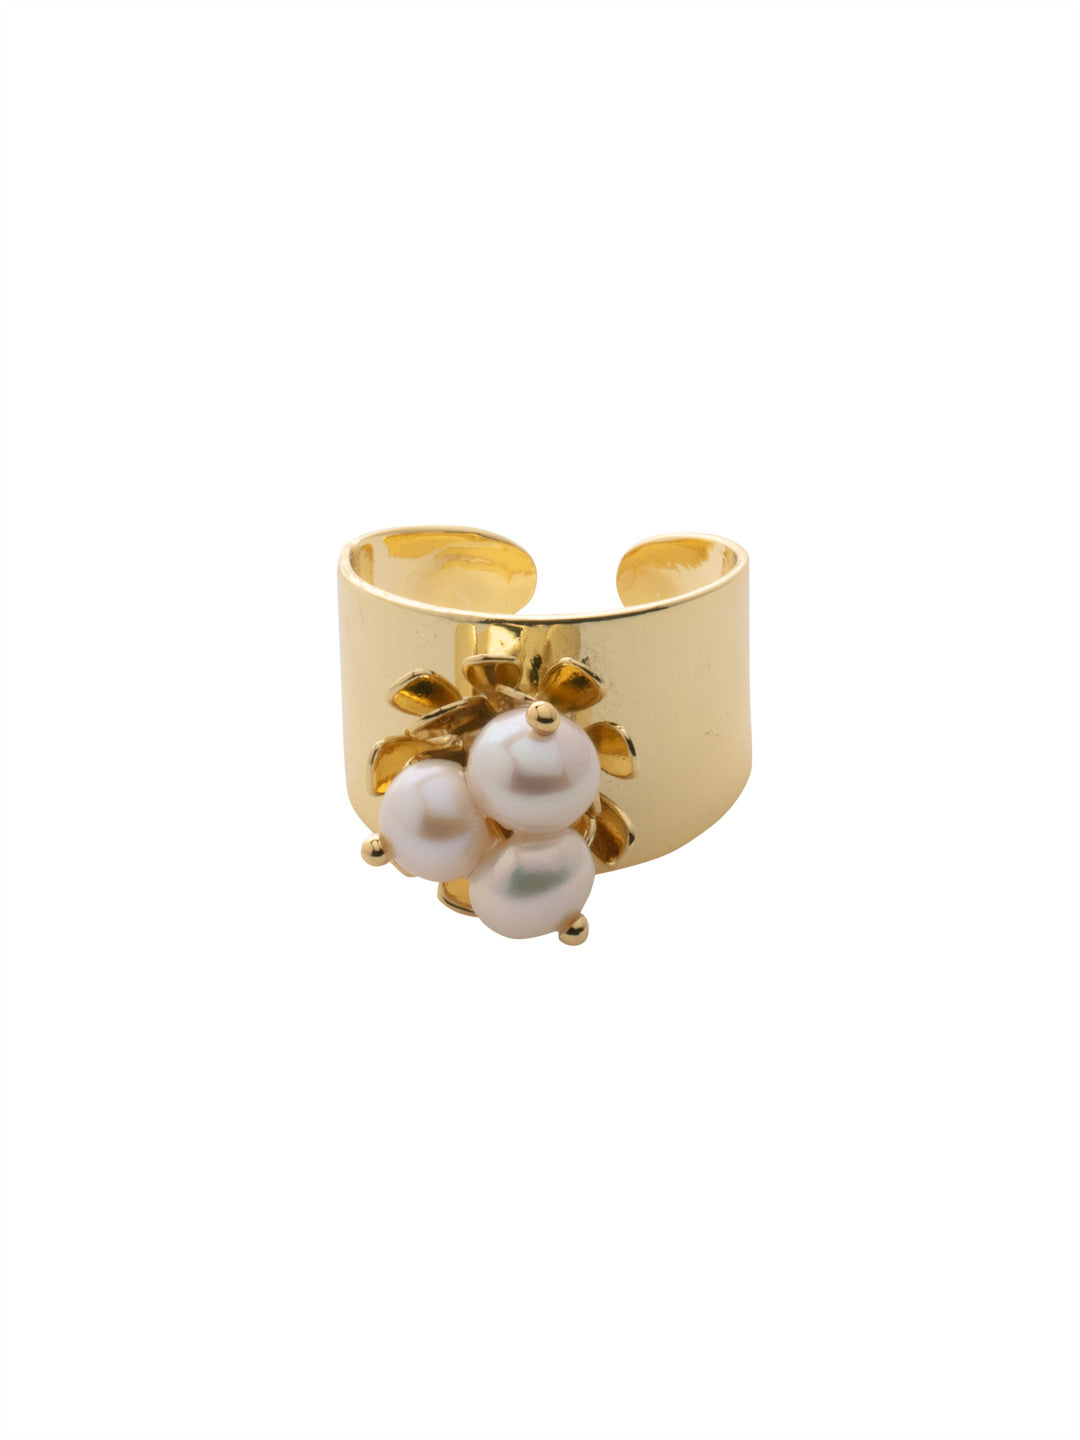 Nesta Band Ring - RFG1BGMDP - <p>The Nesta Band Ring features a nest of freshwater petal pearls on an adjustable metal band. From Sorrelli's Modern Pearl collection in our Bright Gold-tone finish.</p>